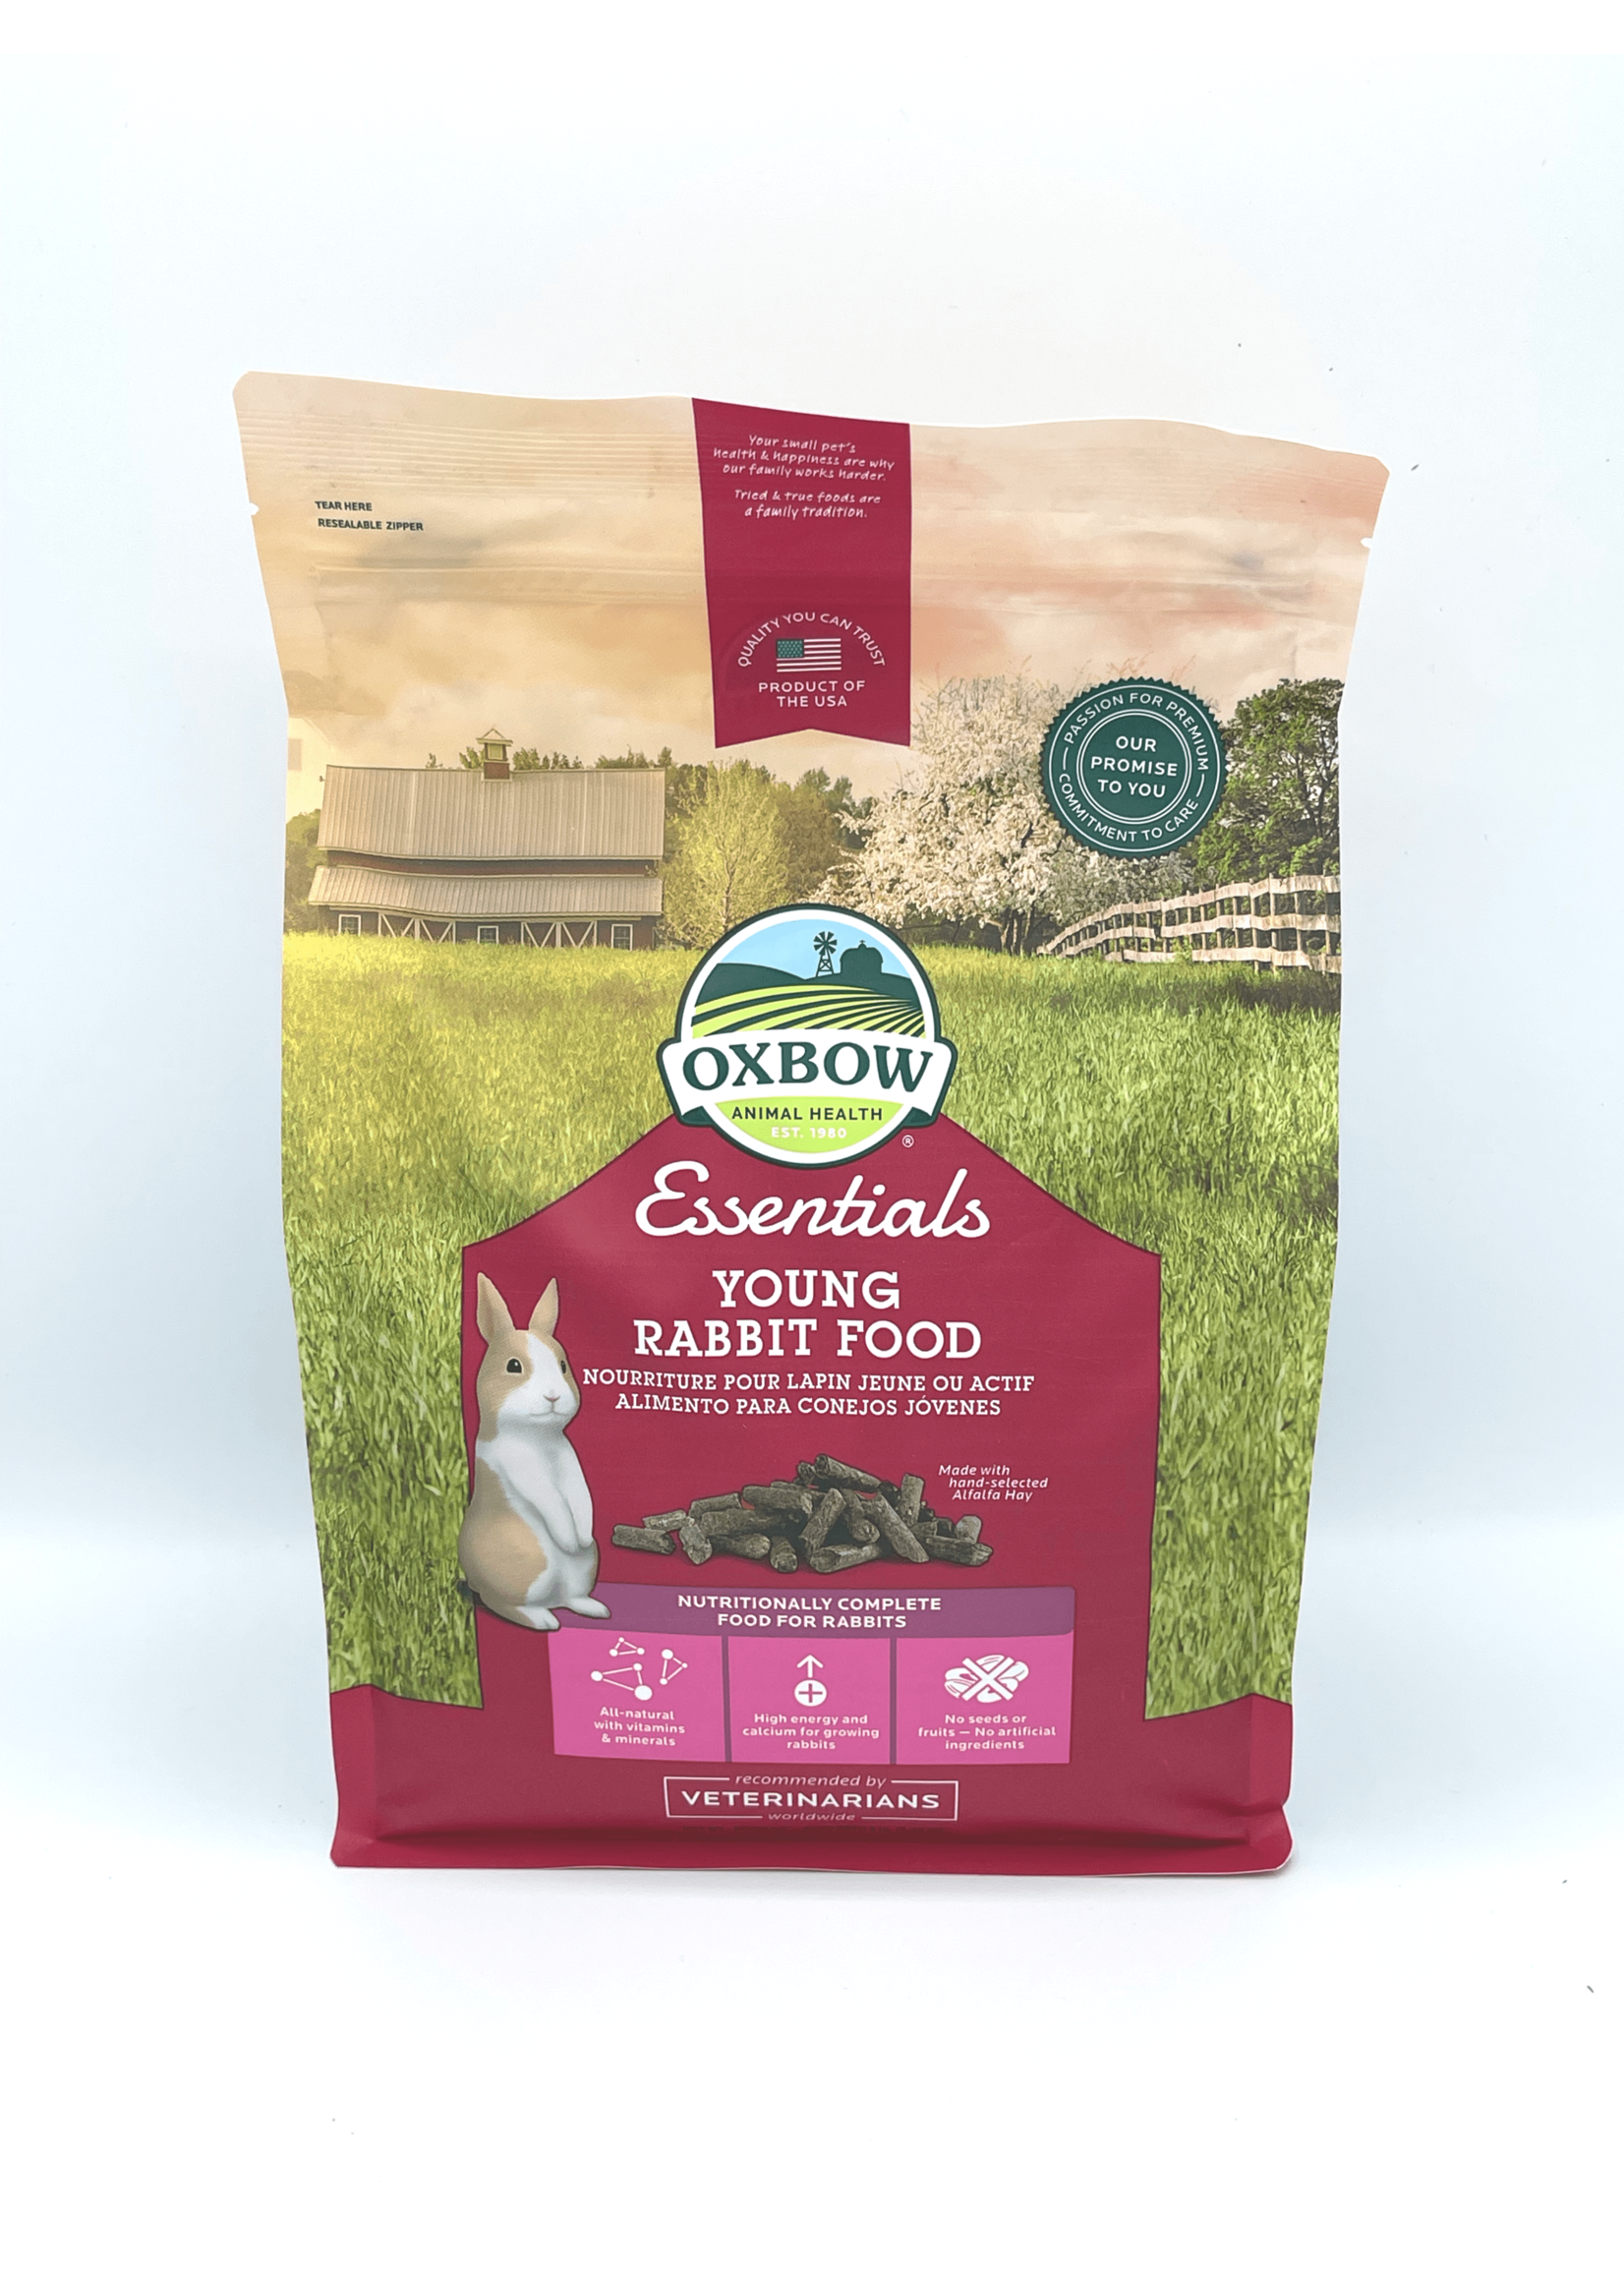 Oxbow Oxbow Essentials Young Rabbit Food, 5lb bag